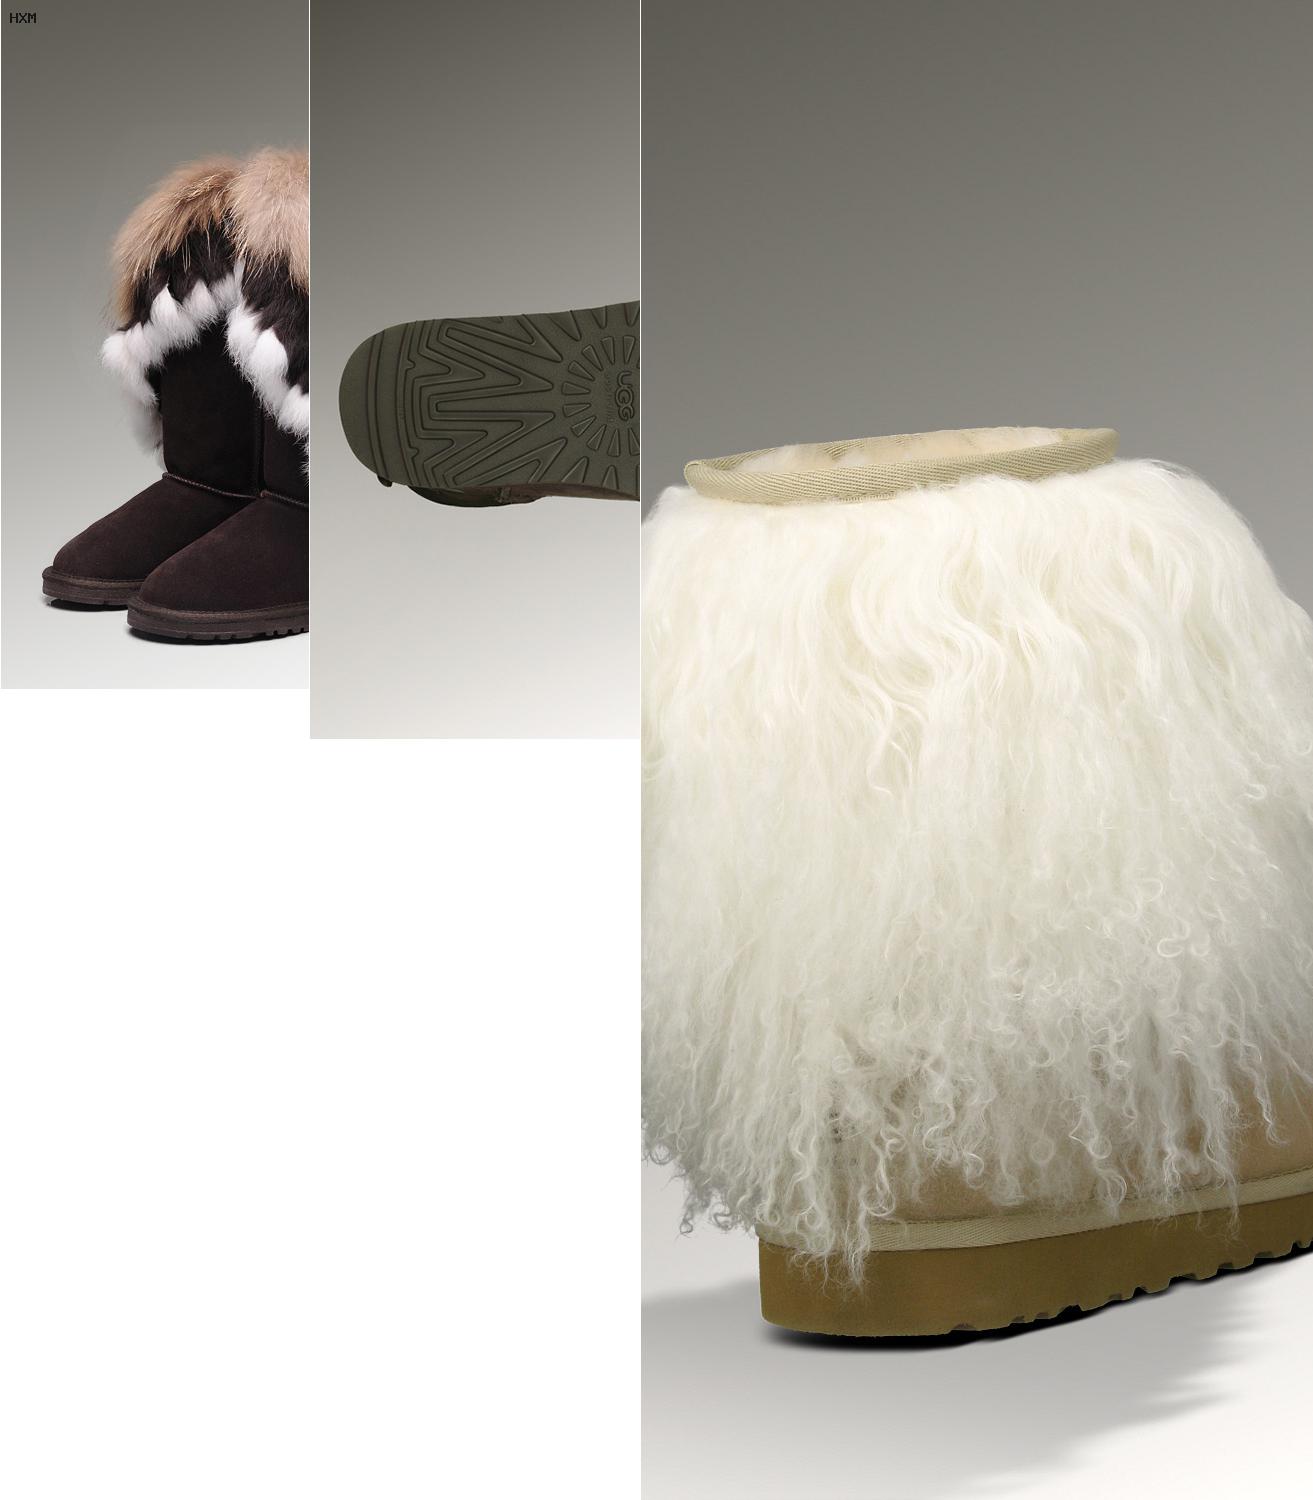 ugg boots australian made and owned